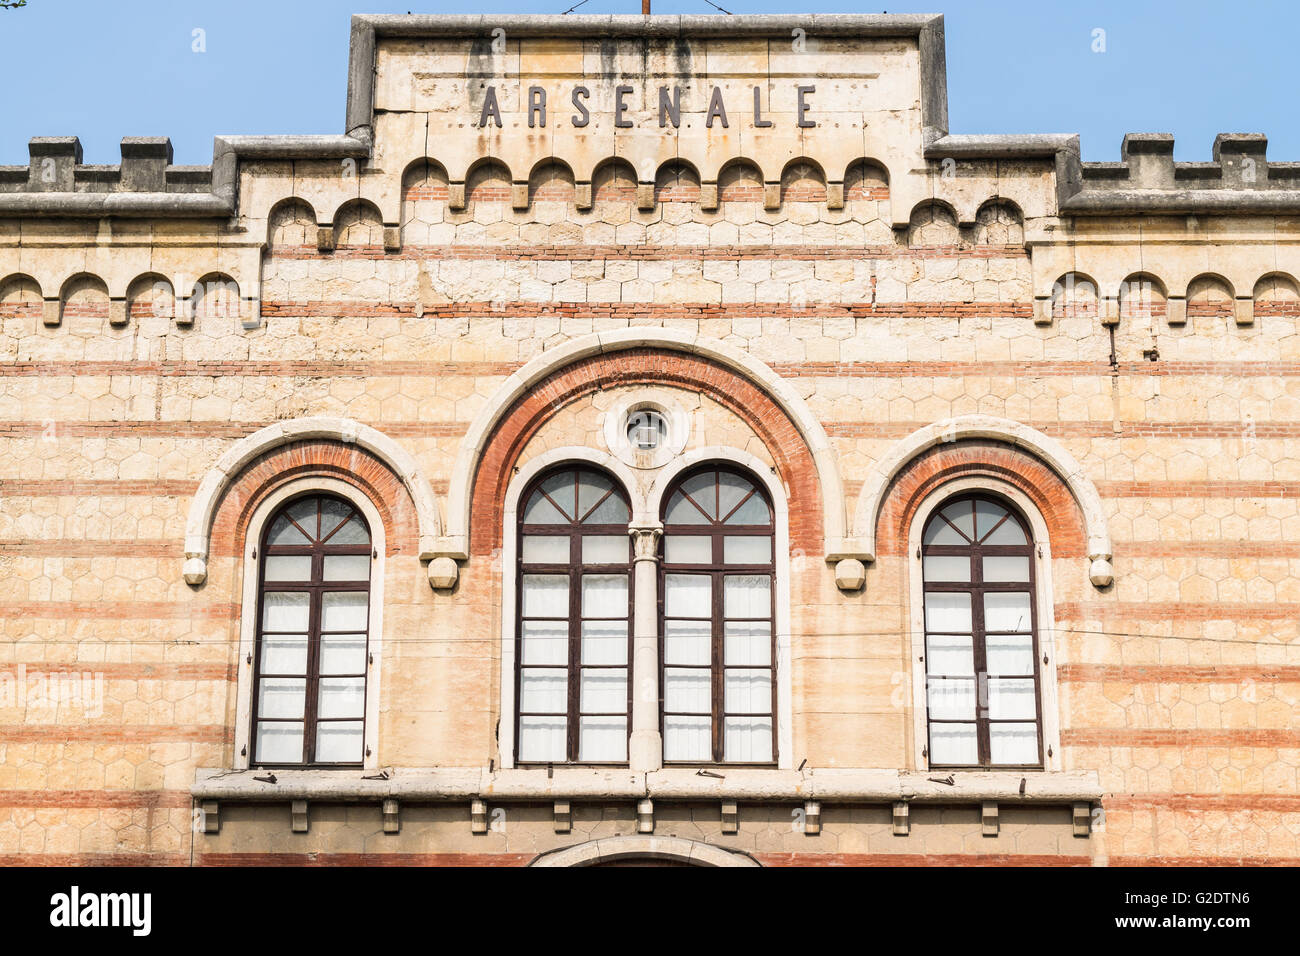 Arsenal facade built around the mid-nineteenth century by the Austrians in Verona. Stock Photo